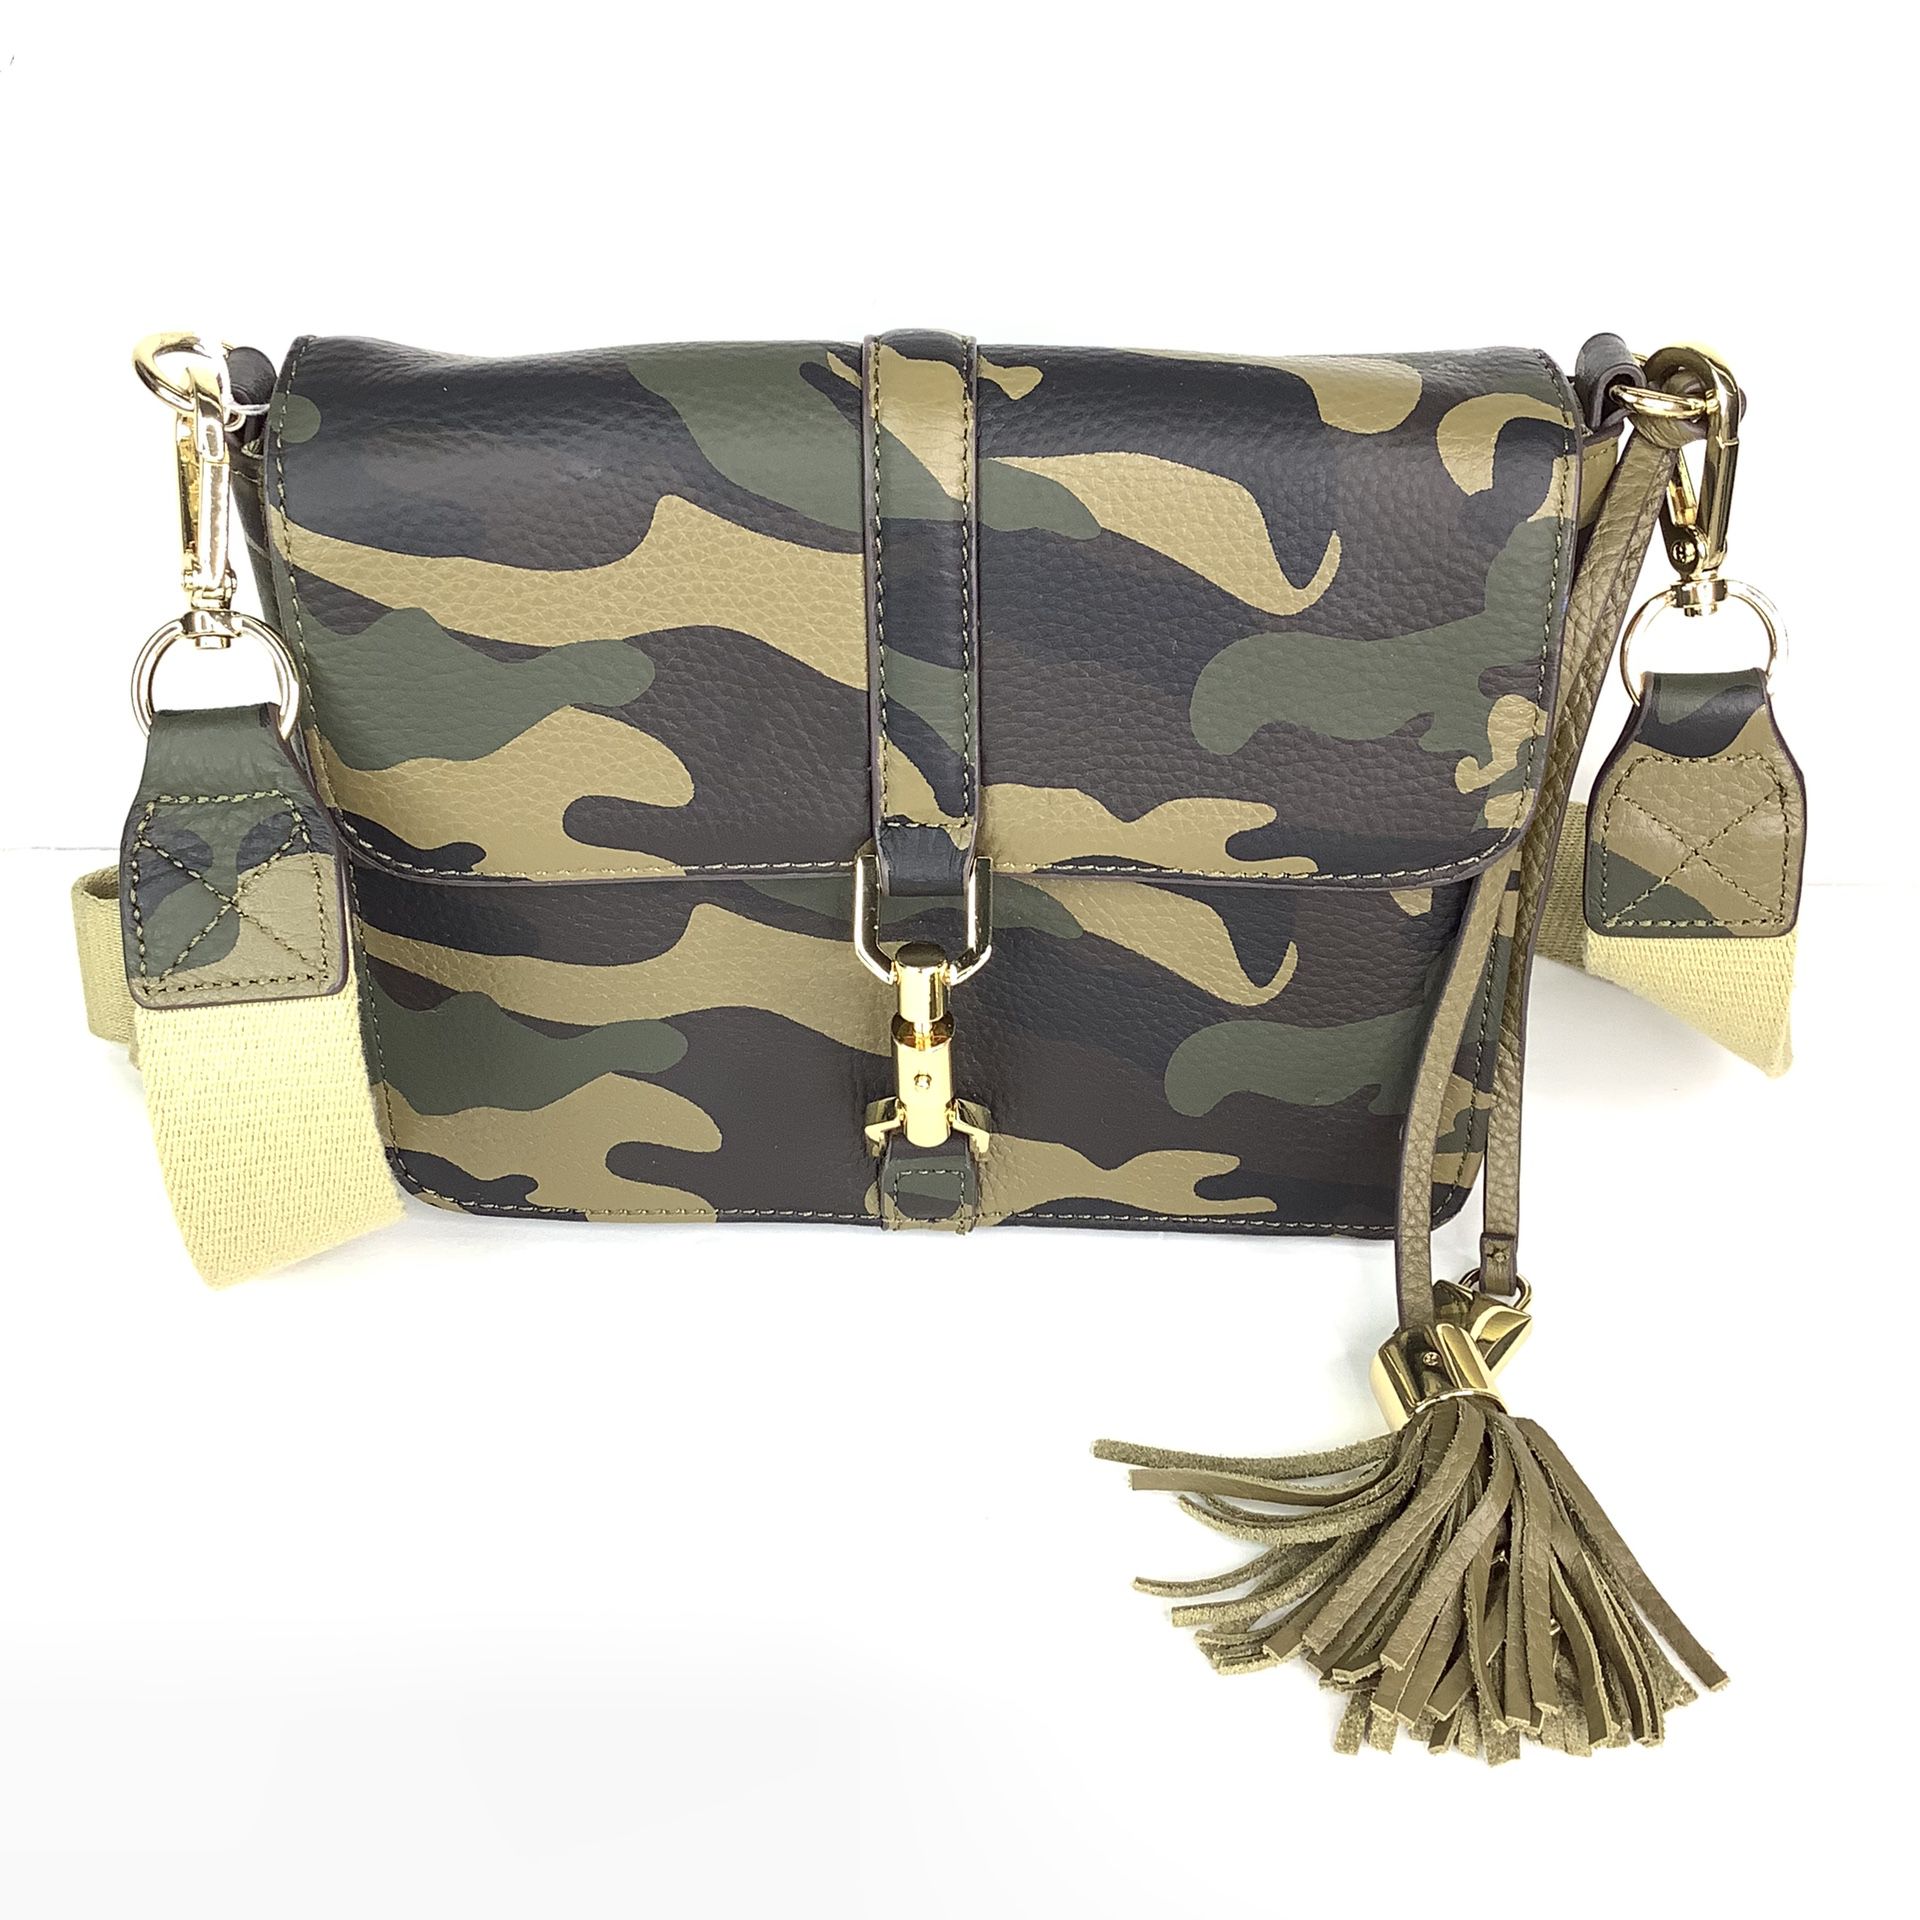 GILL Camouflage Leather Crossbody Bag Purse 